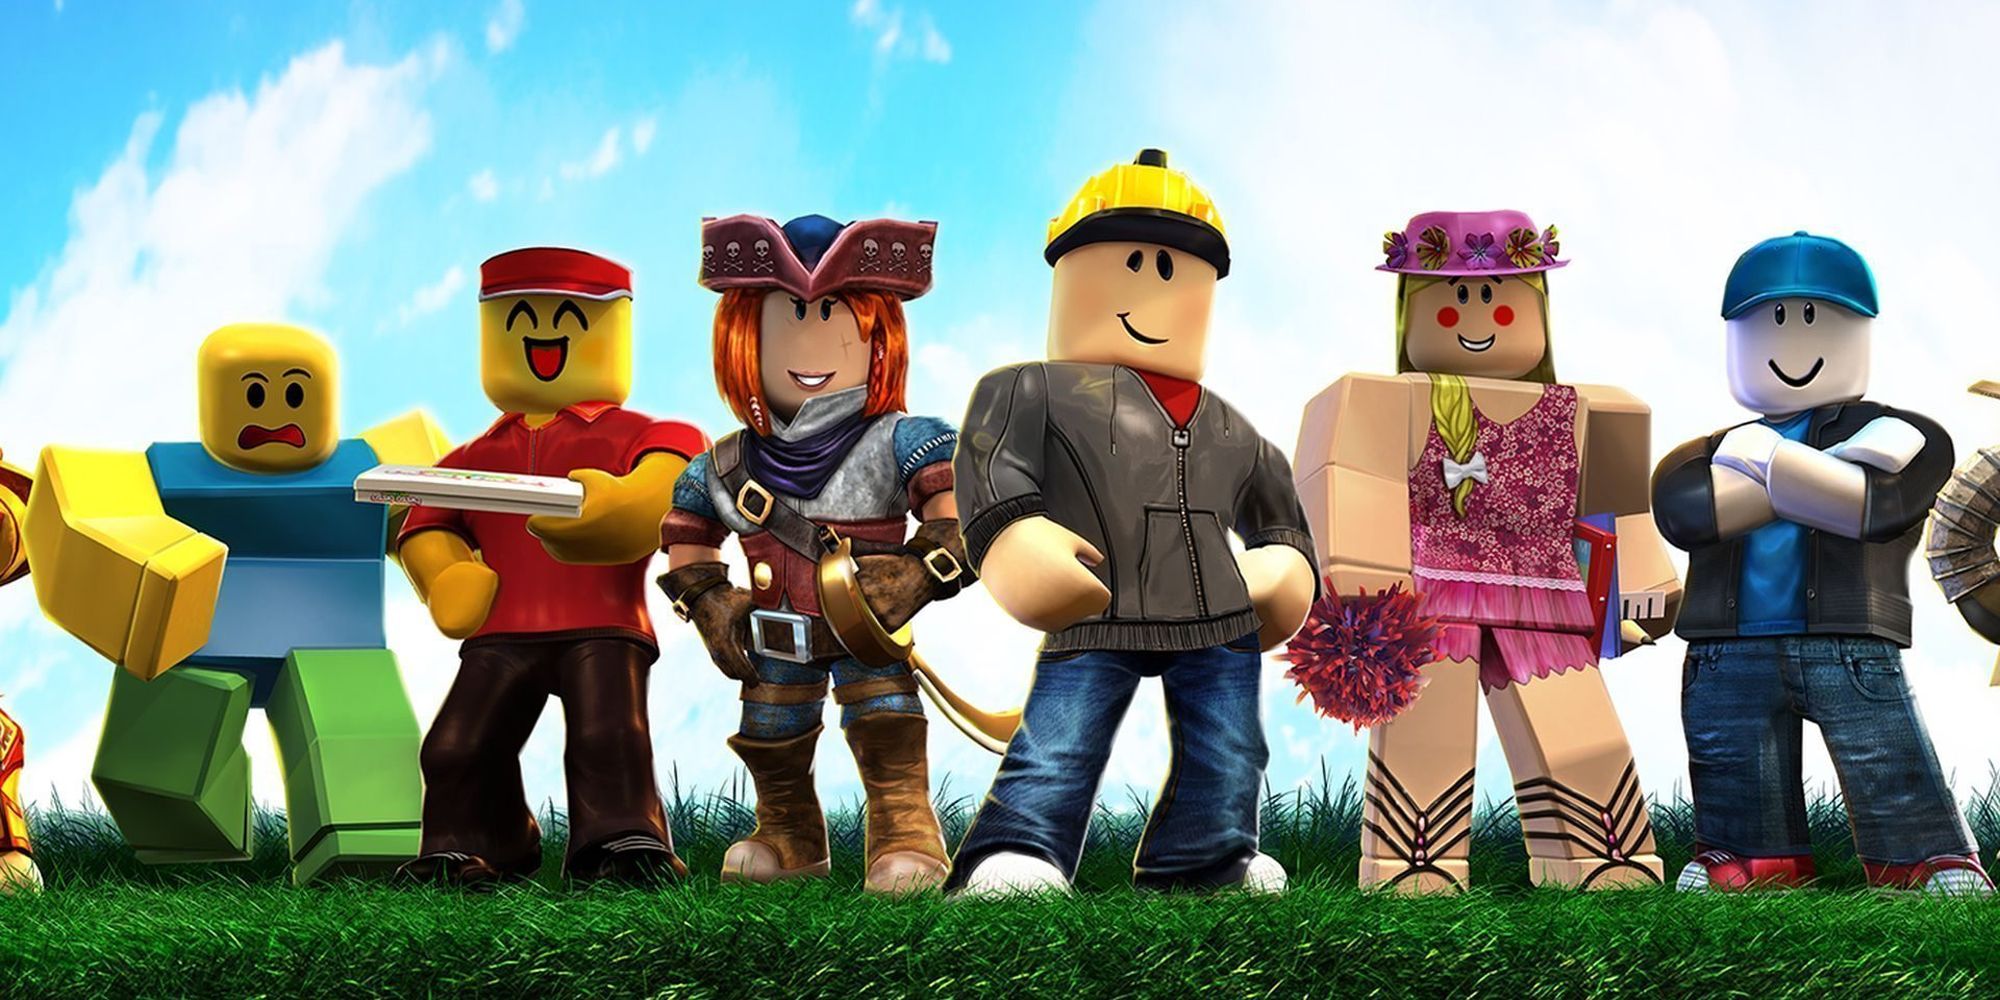 Roblox characters standing side-by-side on a field